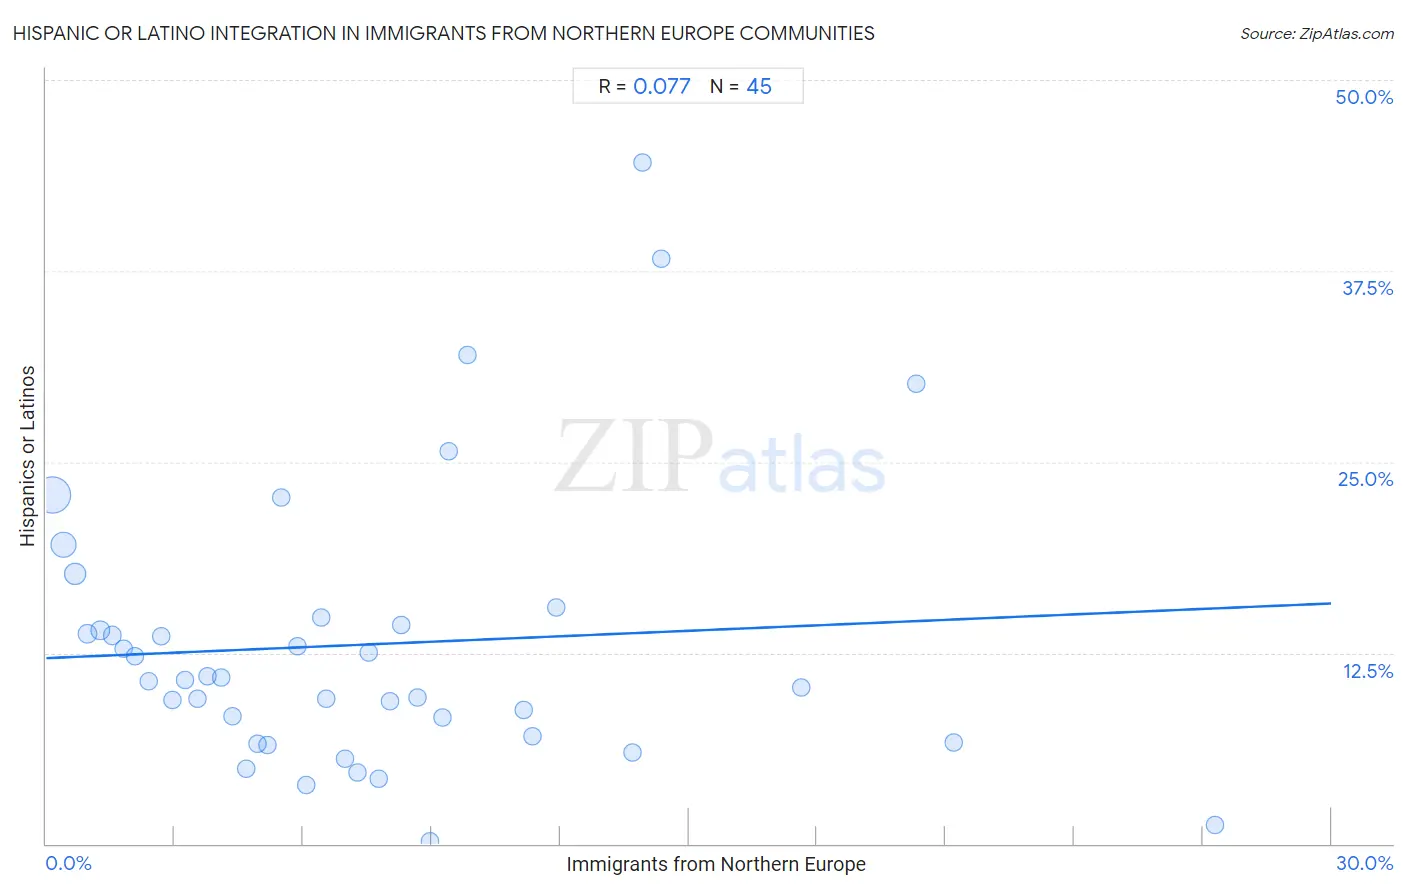 Immigrants from Northern Europe Integration in Hispanic or Latino Communities